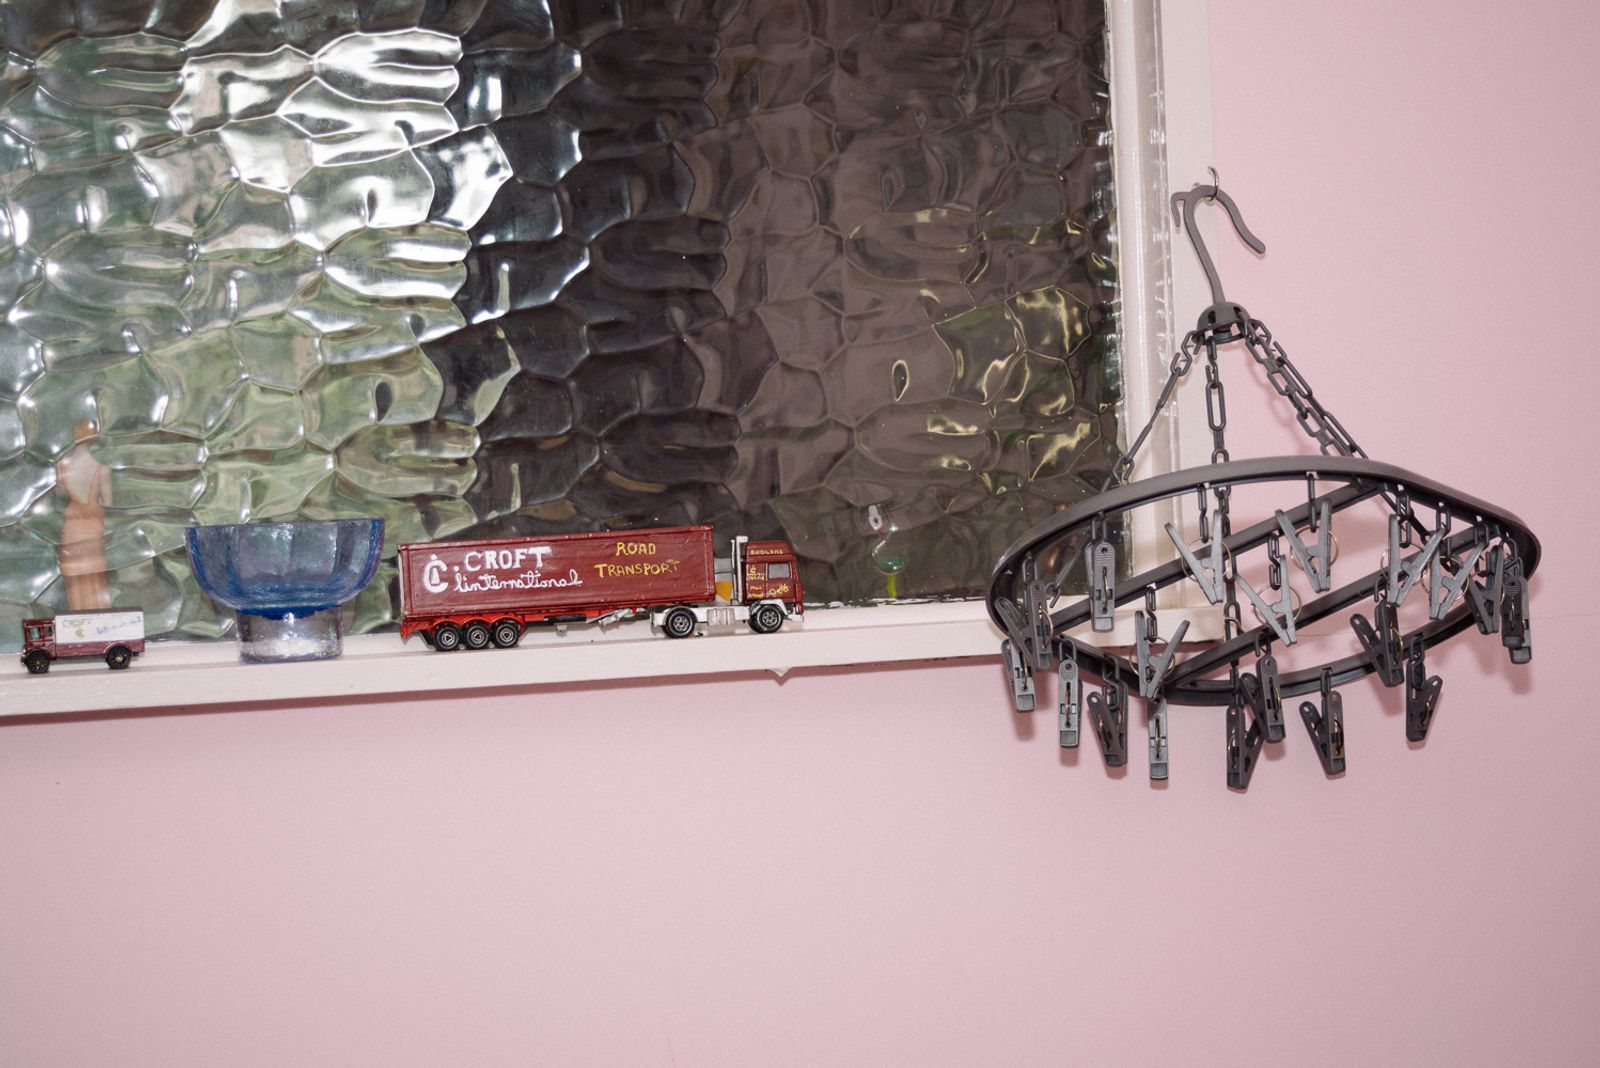 © Emma Wilson - A model truck in Janet’s house representing Croft’s haulage company, Jim’s Business for 30 years.